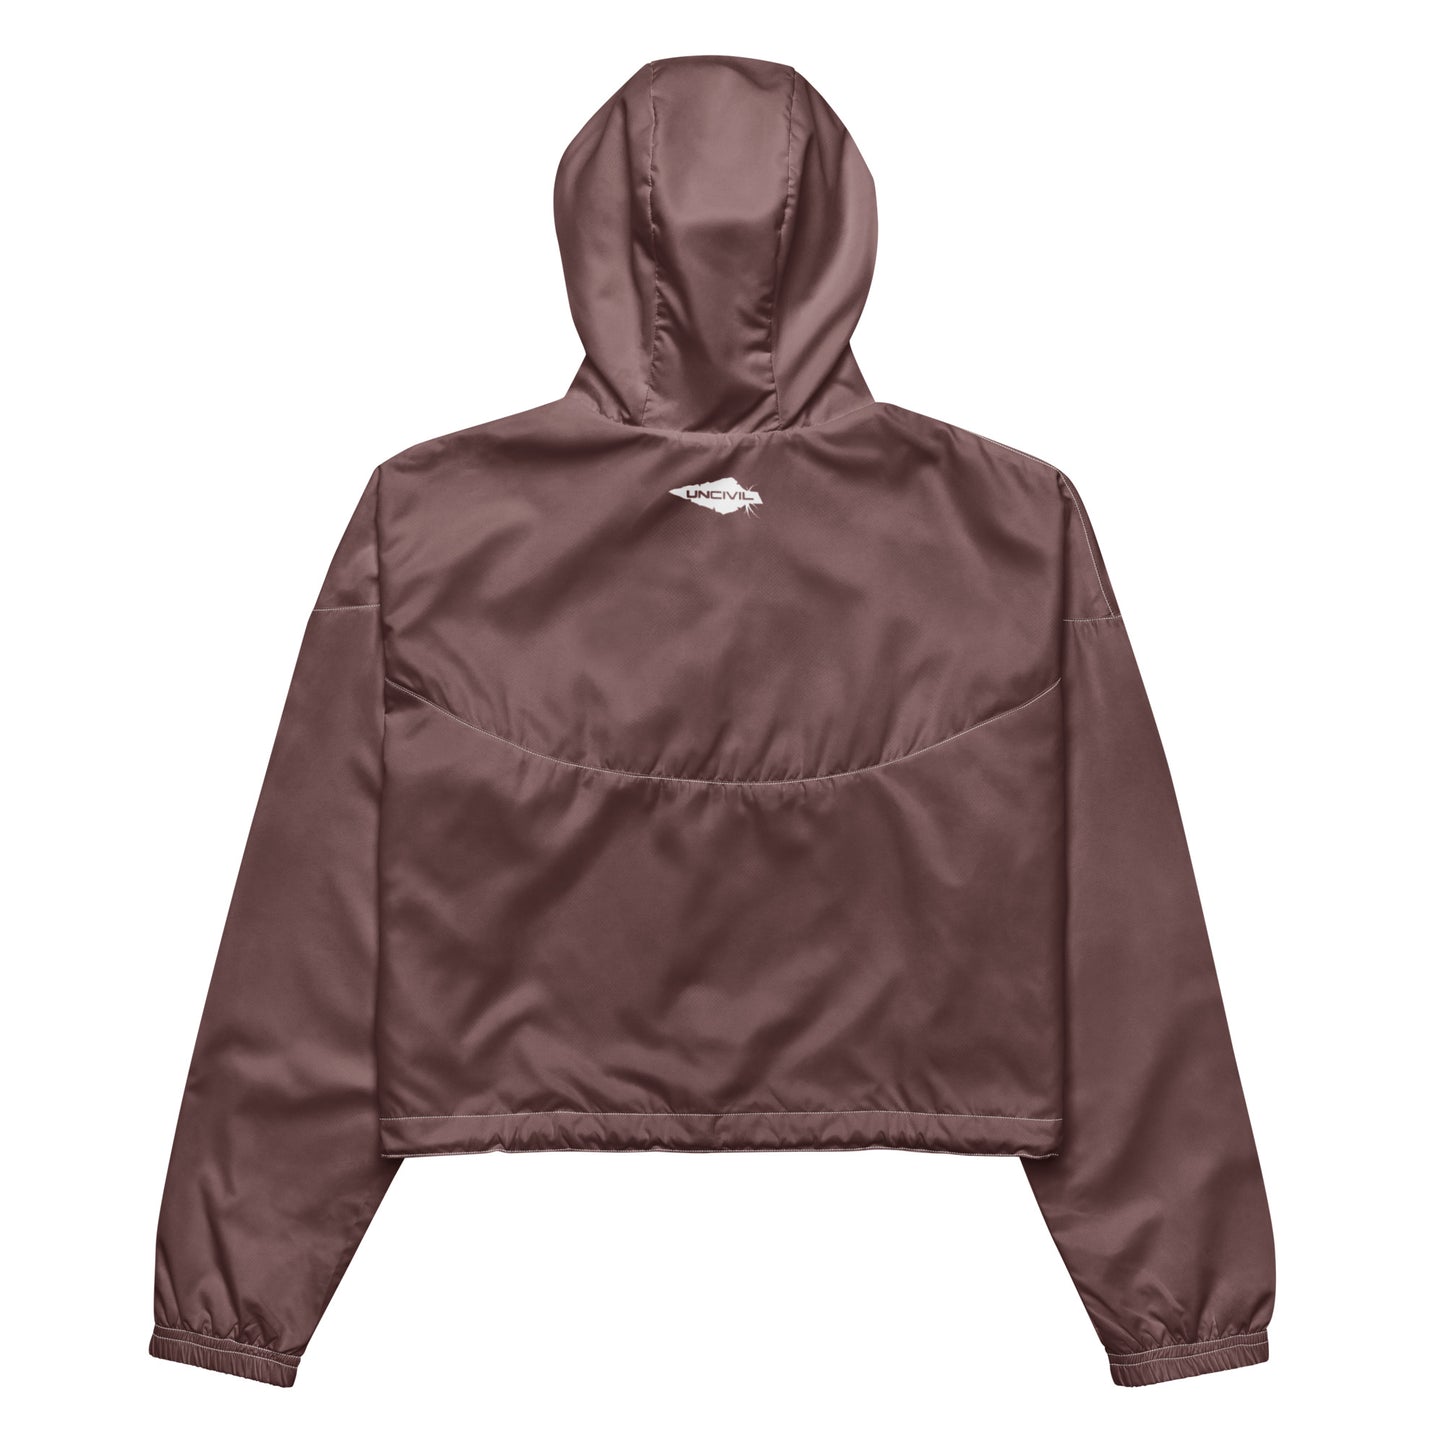 Our Muave Cropped Windbreaker is lightweight, waterproof, and suitable for every kind of adventure. Includes side-slit pockets, breathable mesh lining, and adjustable drawcords on the hood and waist.